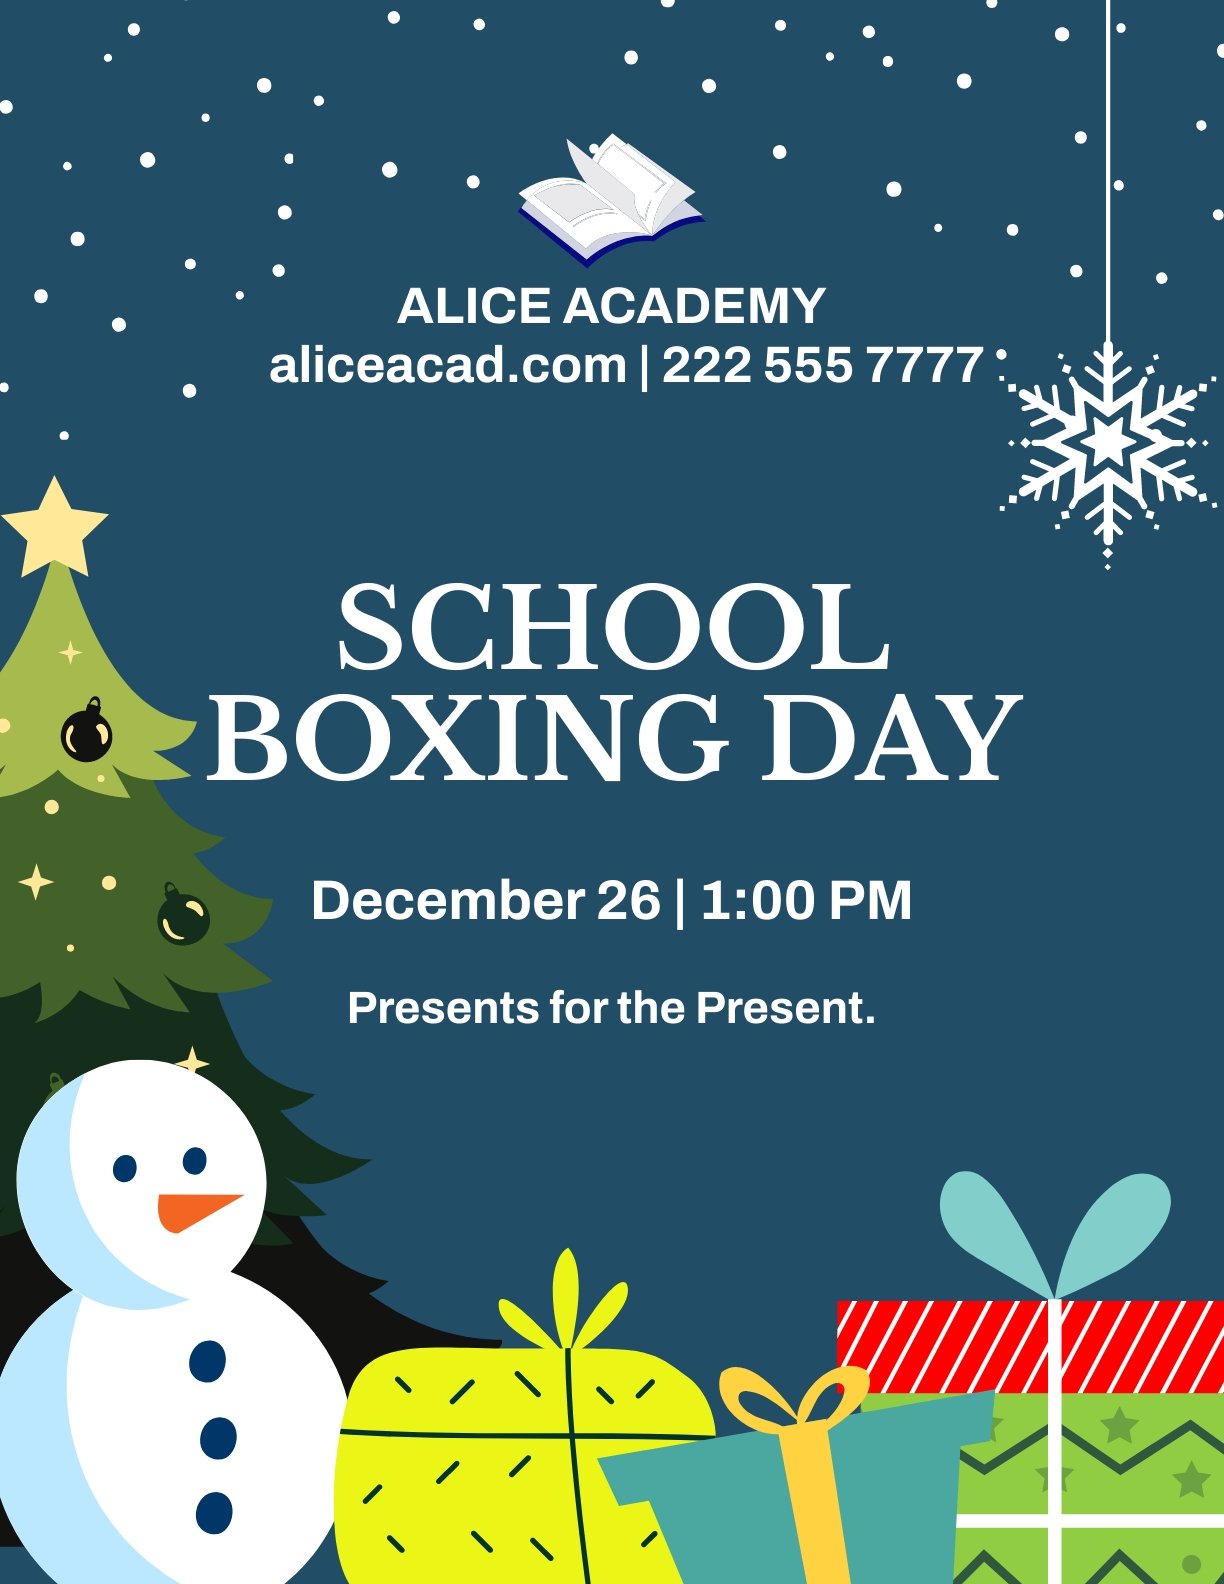 Free Boxing Day Event Flyer in Word, Google Docs, Illustrator, PSD, EPS, SVG, JPG, PNG